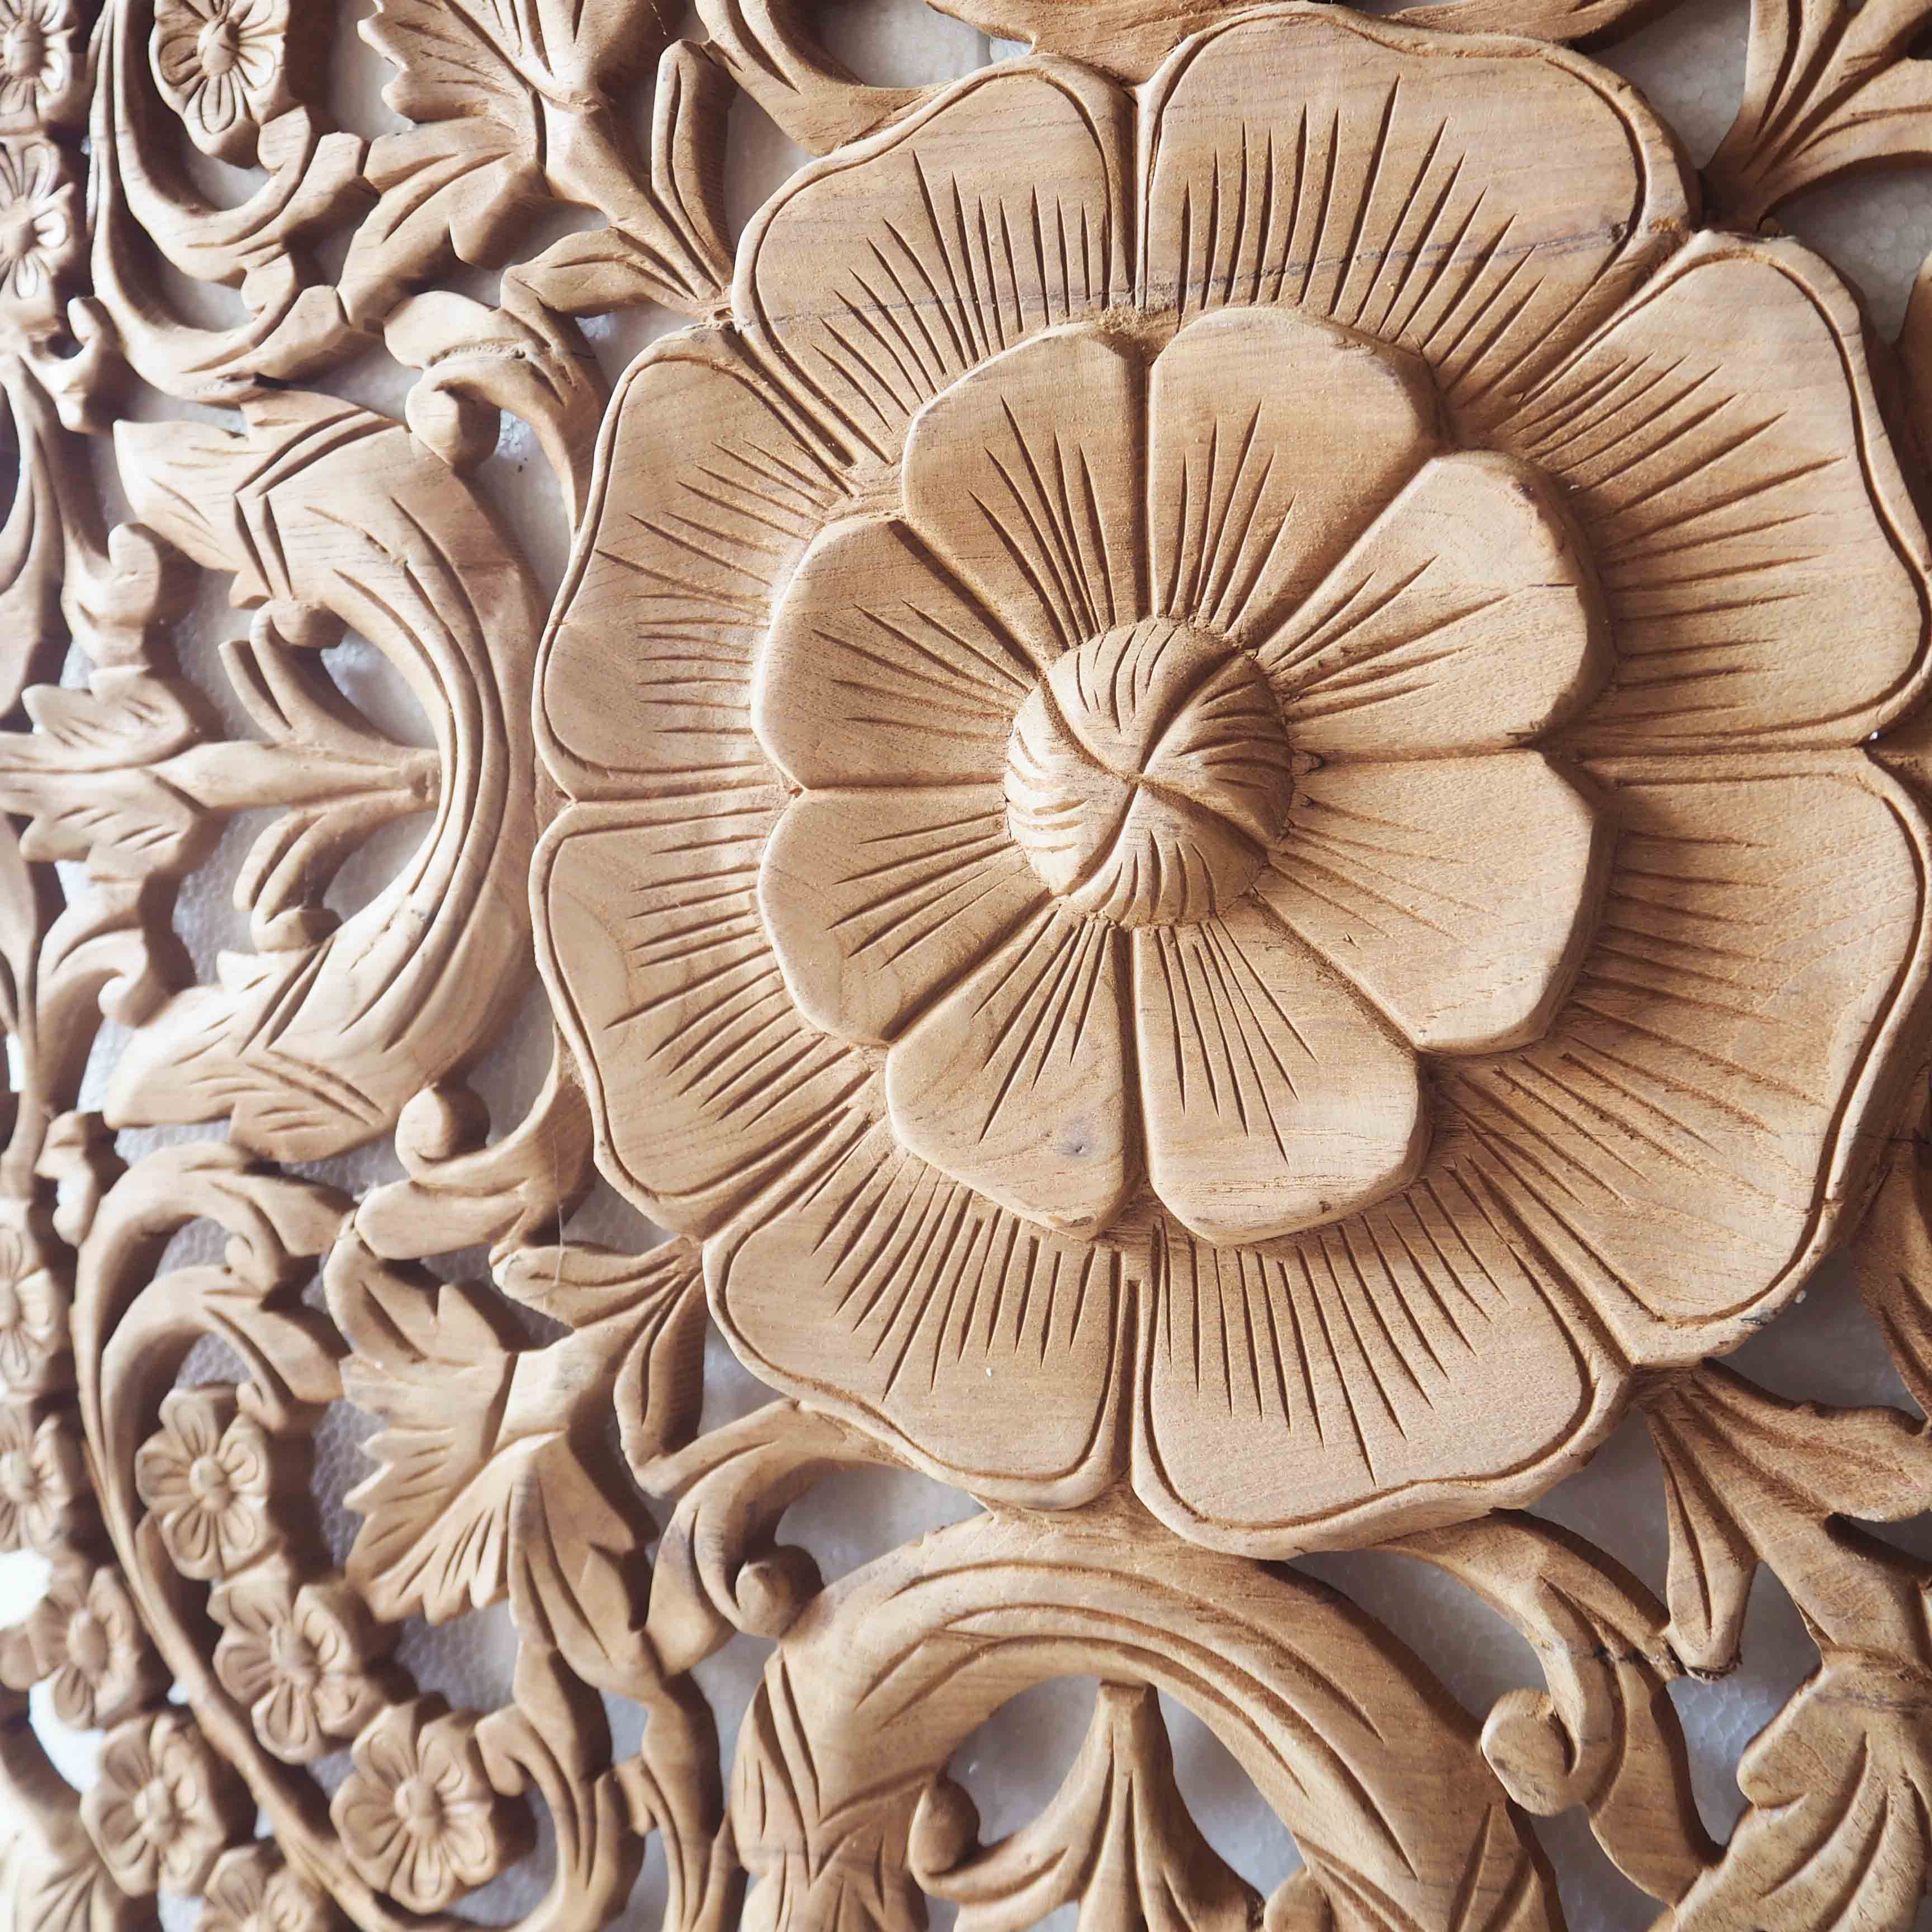 Wood Panel Wall Decor: A Touch Of Nature For Your Home